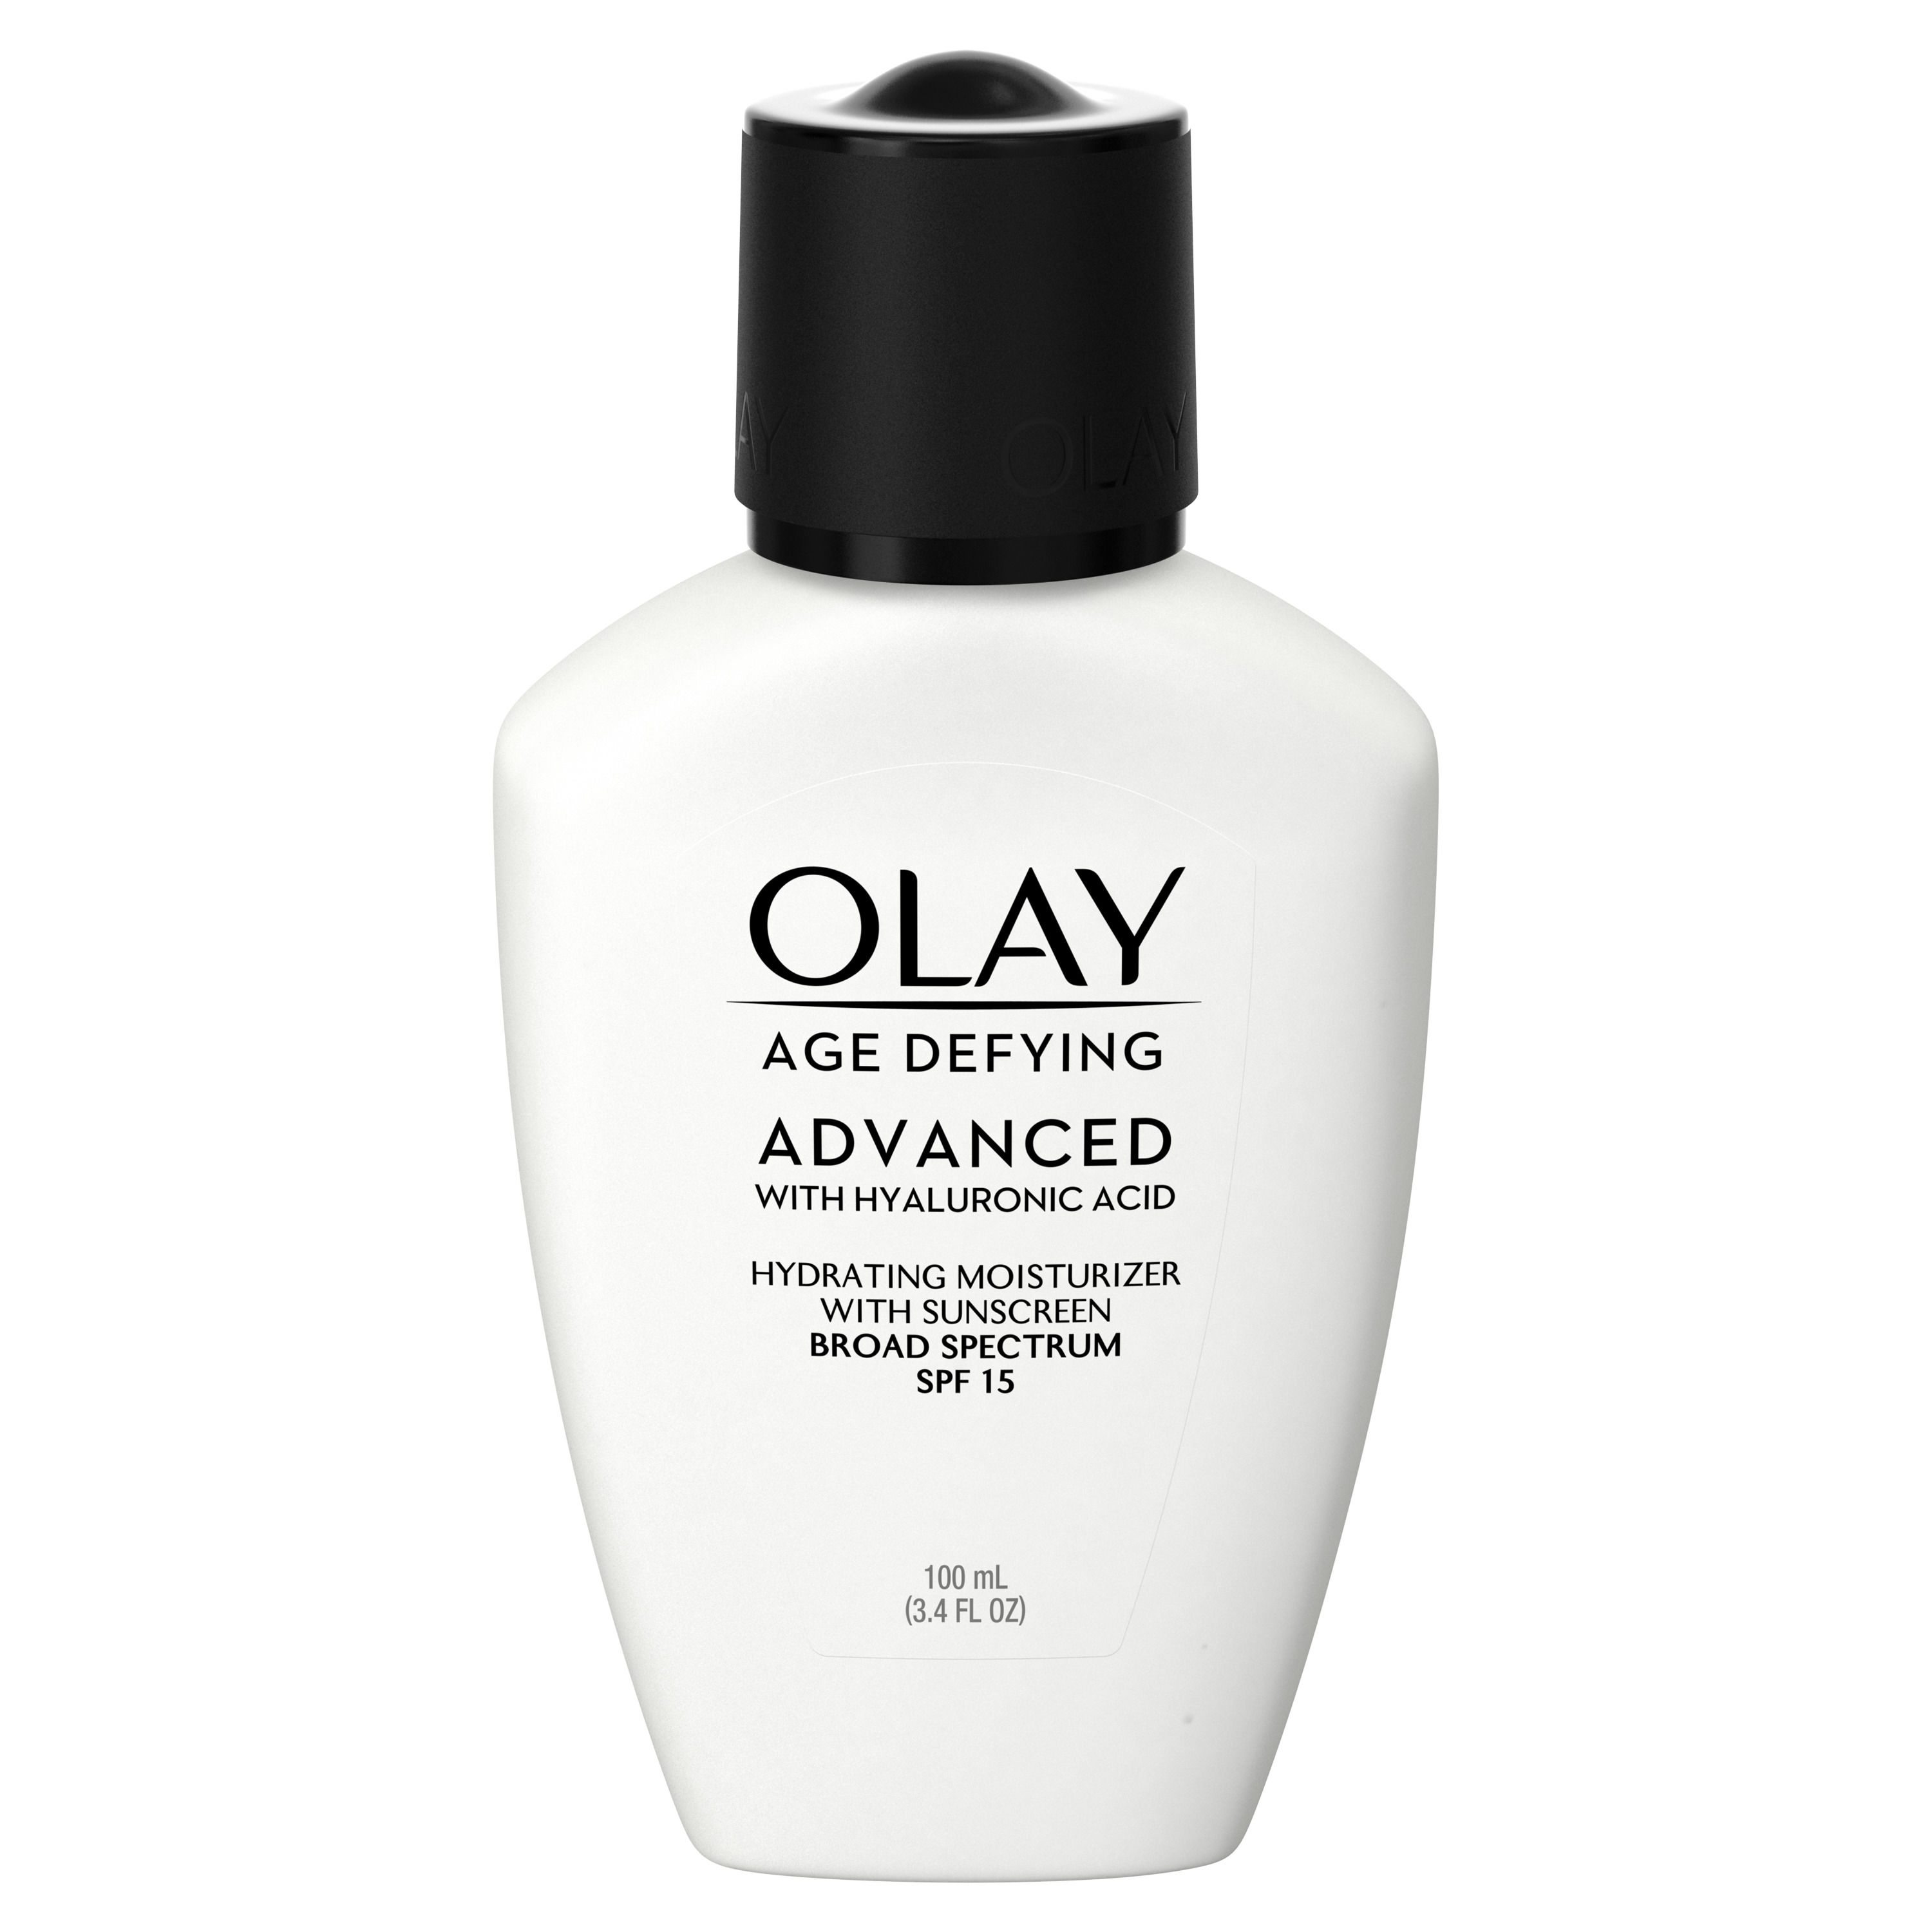 Olay Age Defying ADVANCED with Hyaluronic Acid Hydrating Moisturizer with SPF 15, 3.4 fl oz